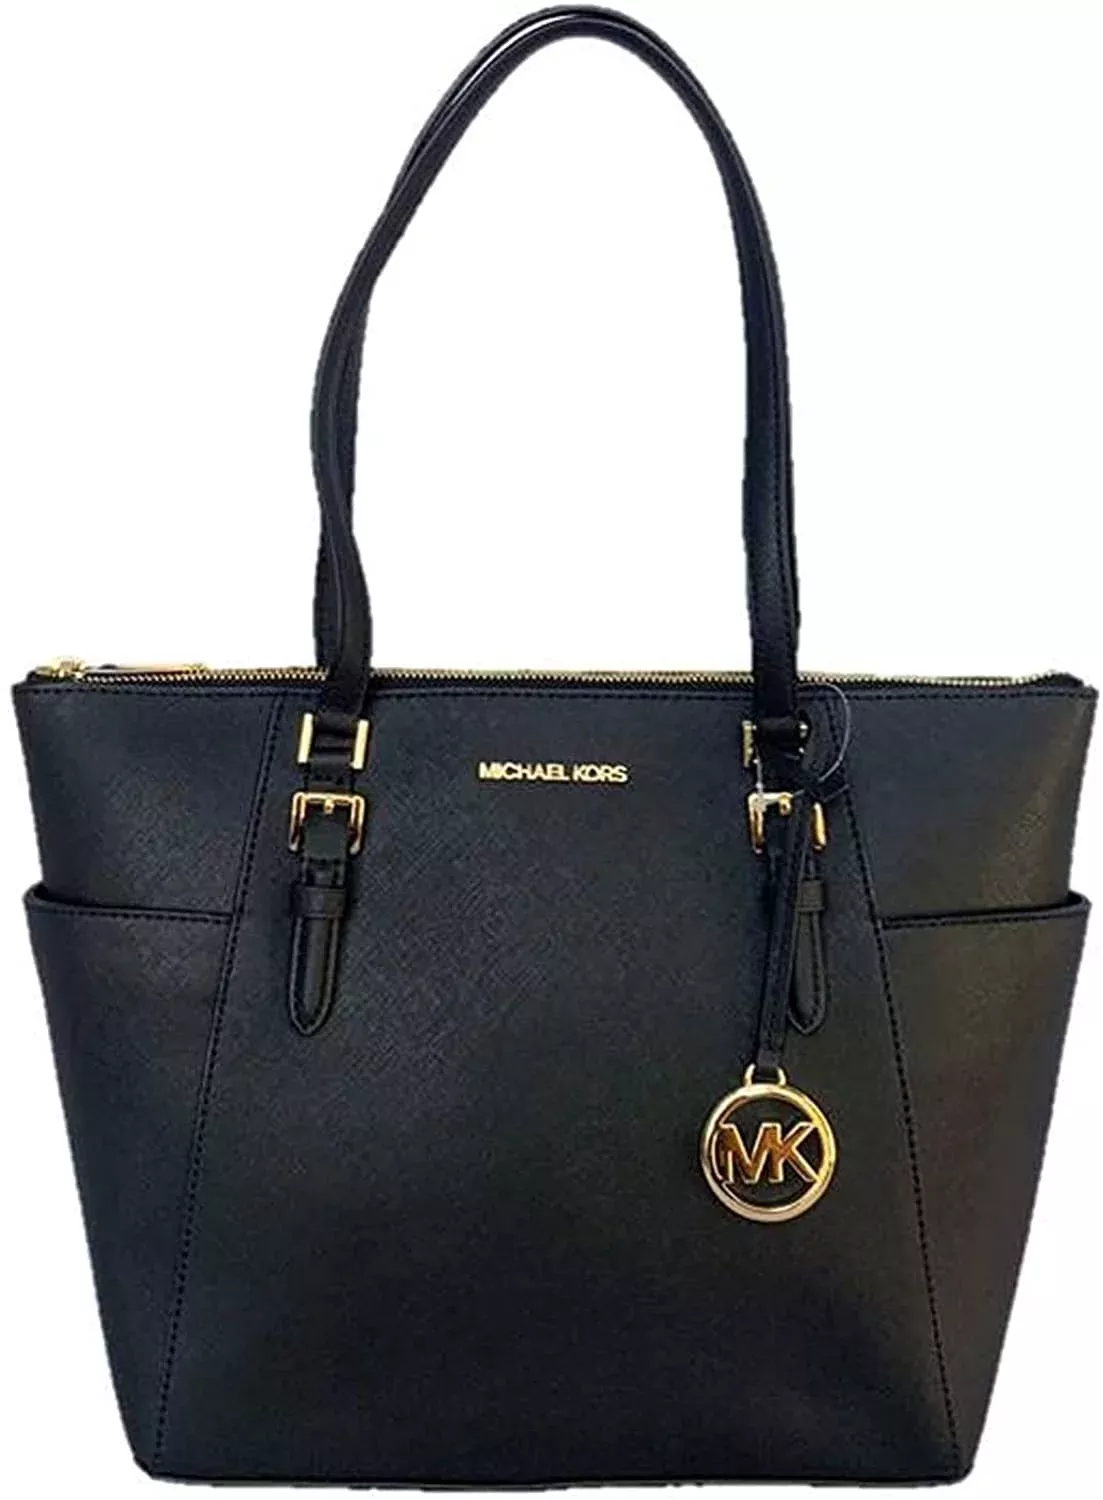 Michael Kors Charlotte Large Top Zip Tote Saffiano Leather in